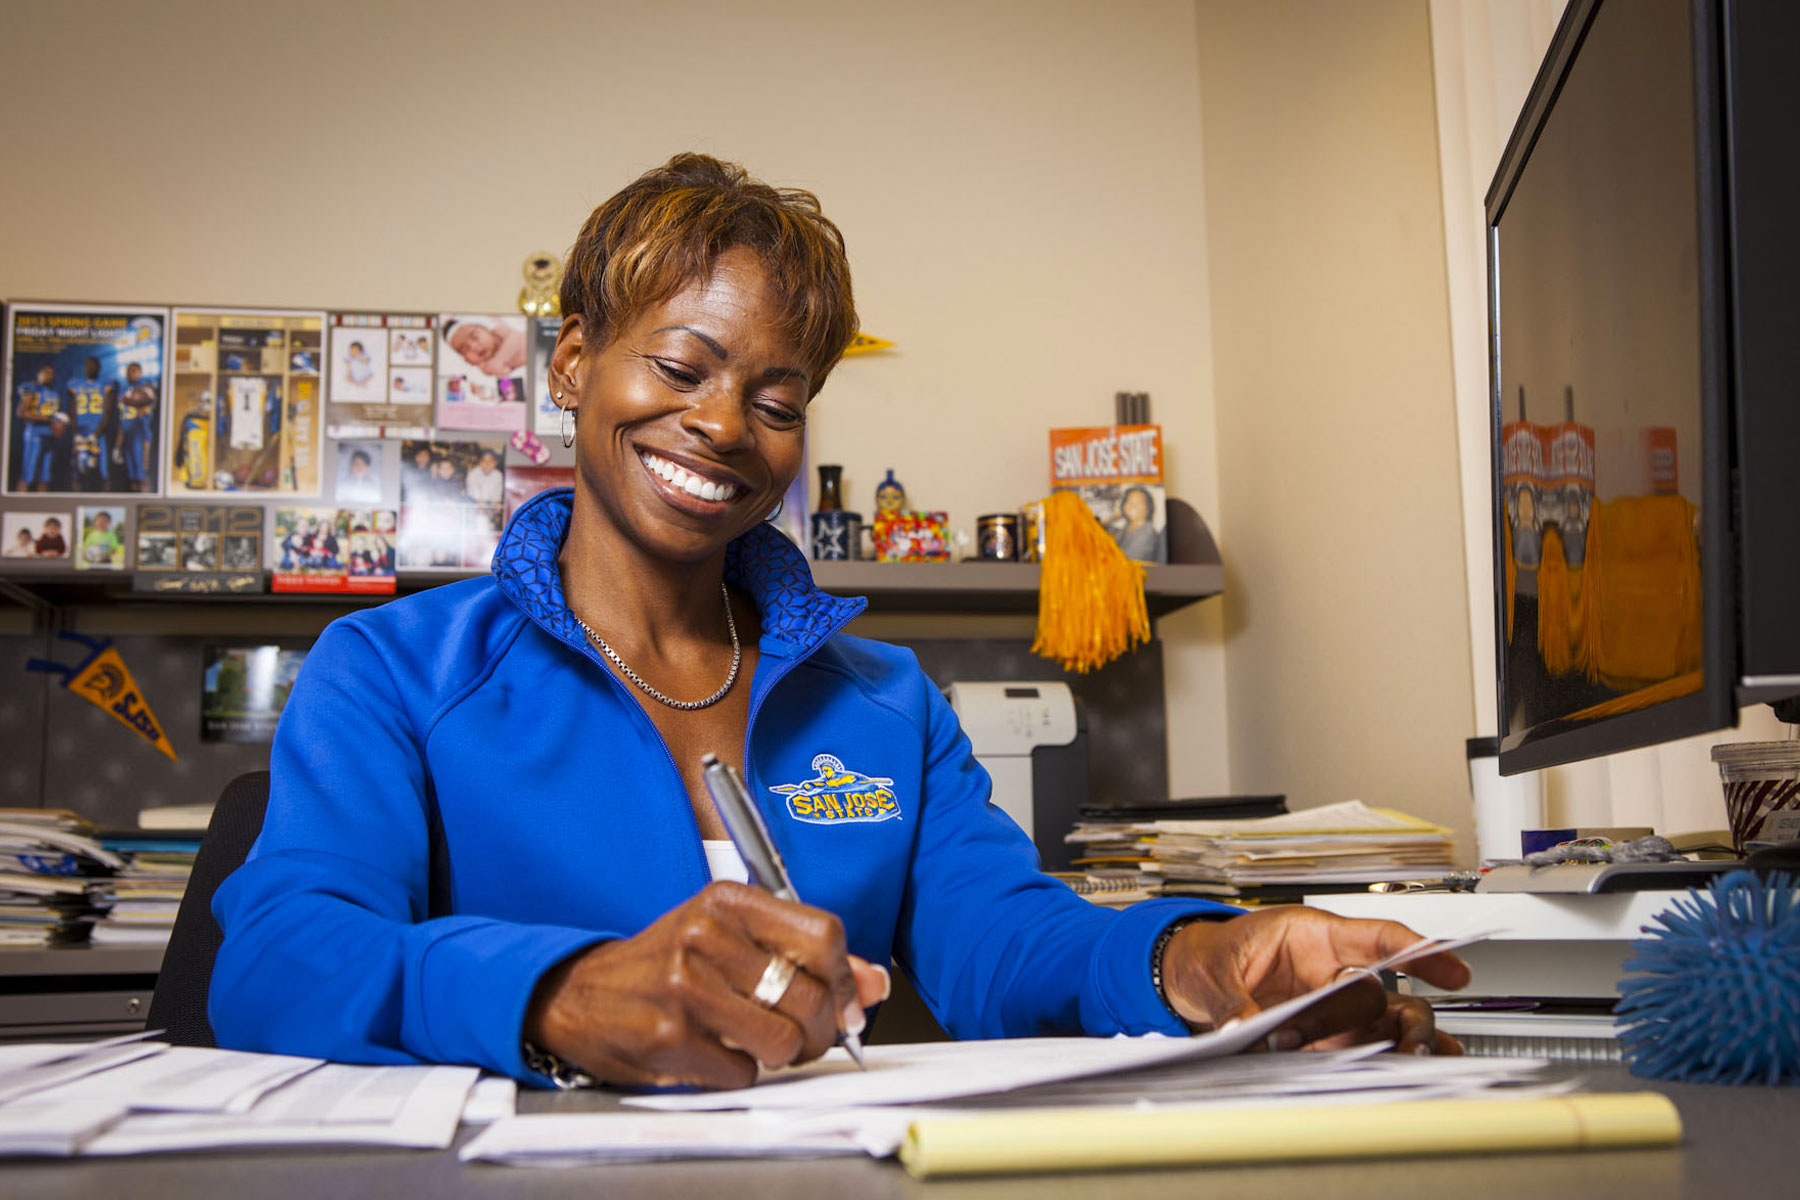 Coleetta McElroy smiling while doing paperwork.